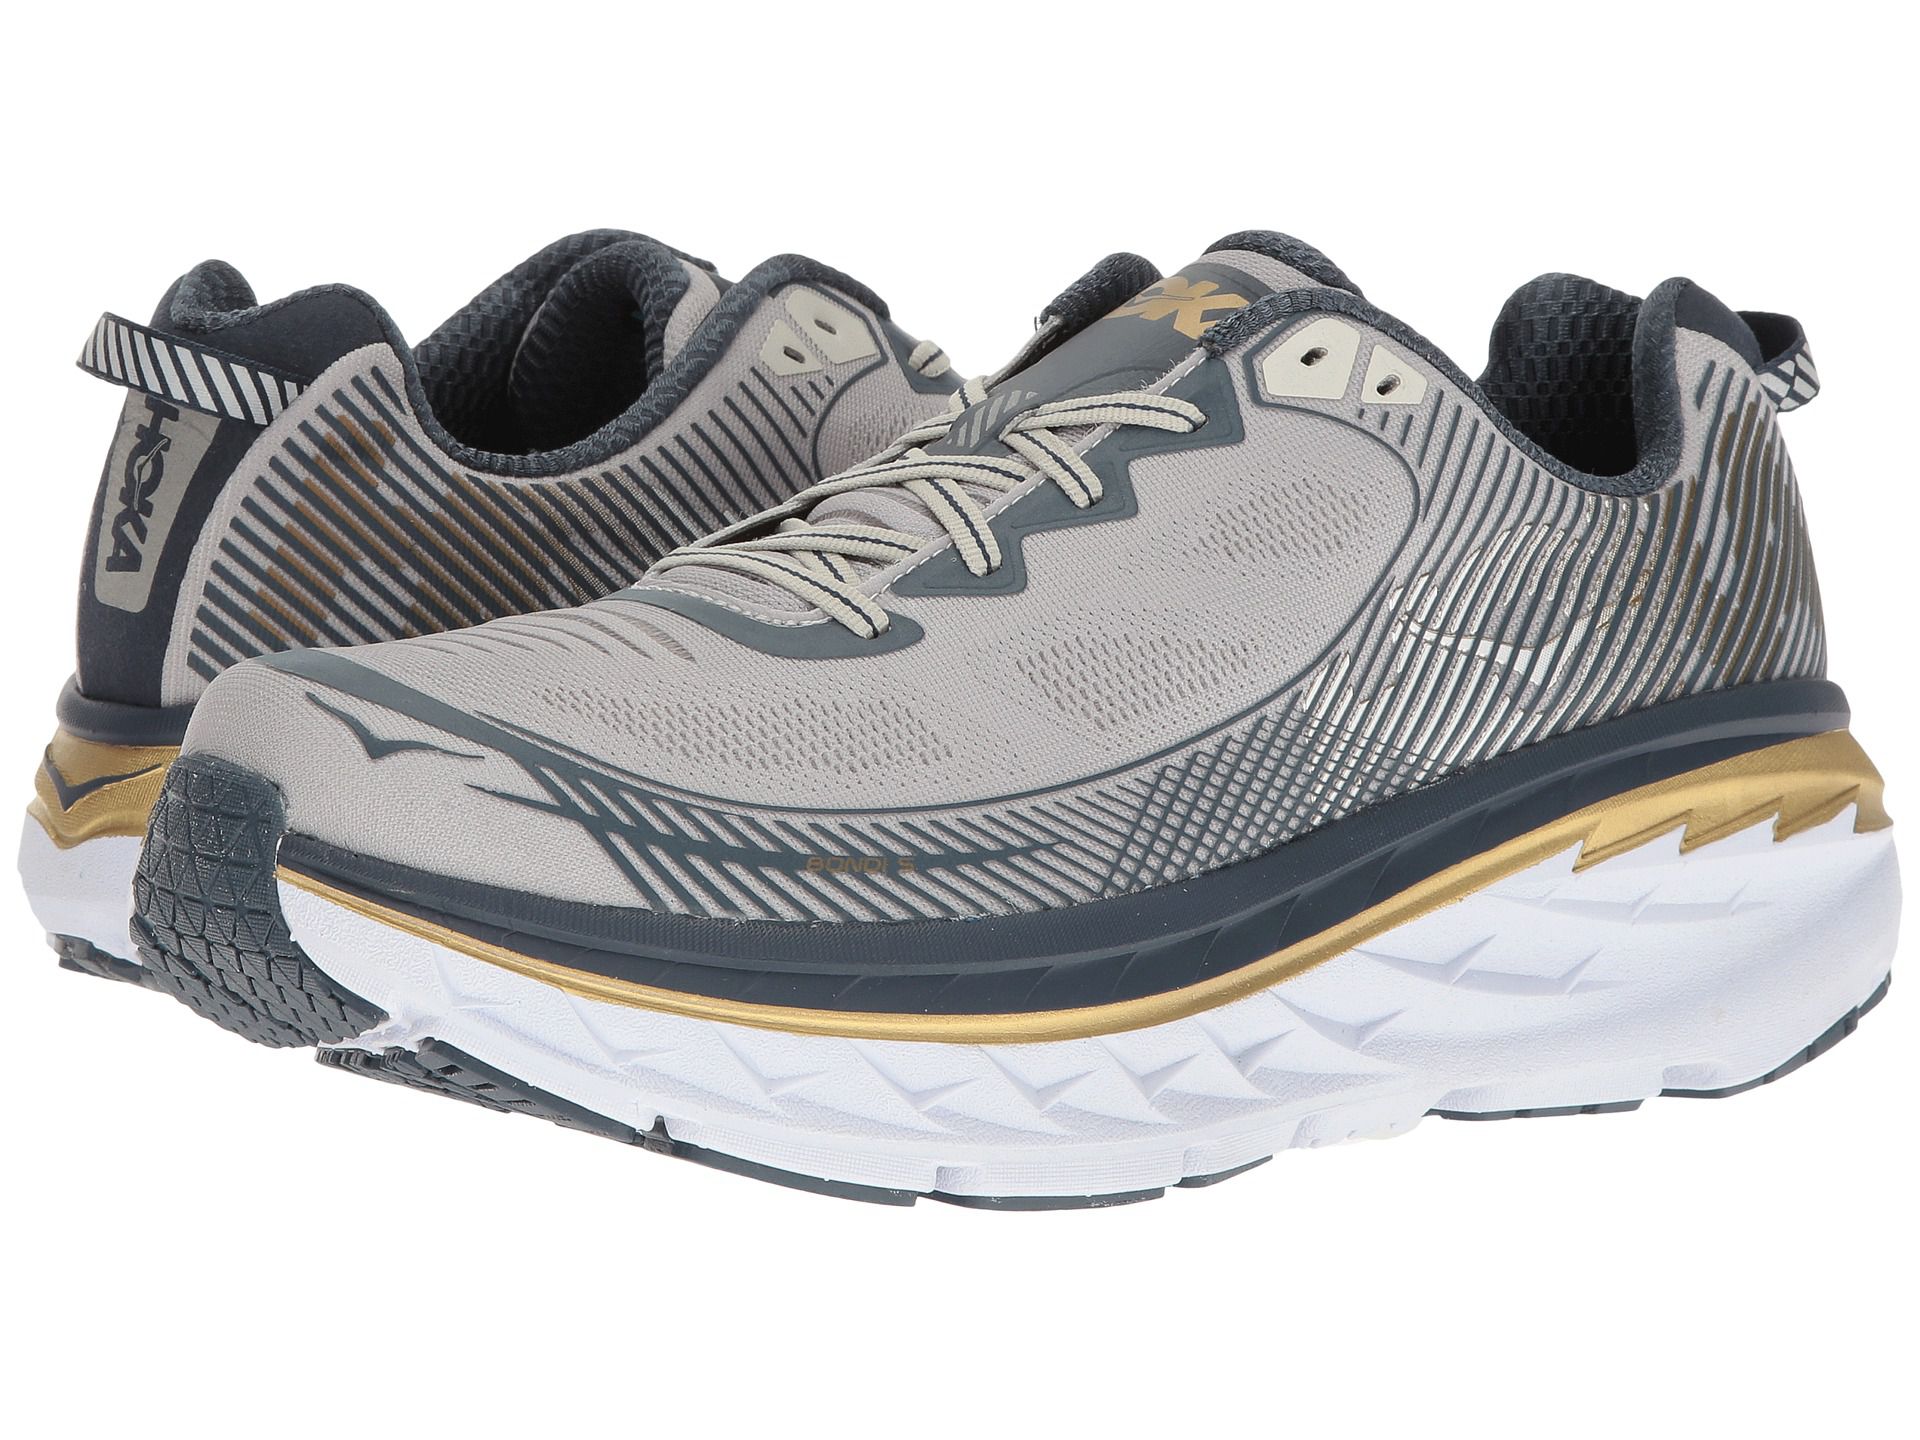 The 8 Best Cushioned Running Shoes for Men to Buy in 2018